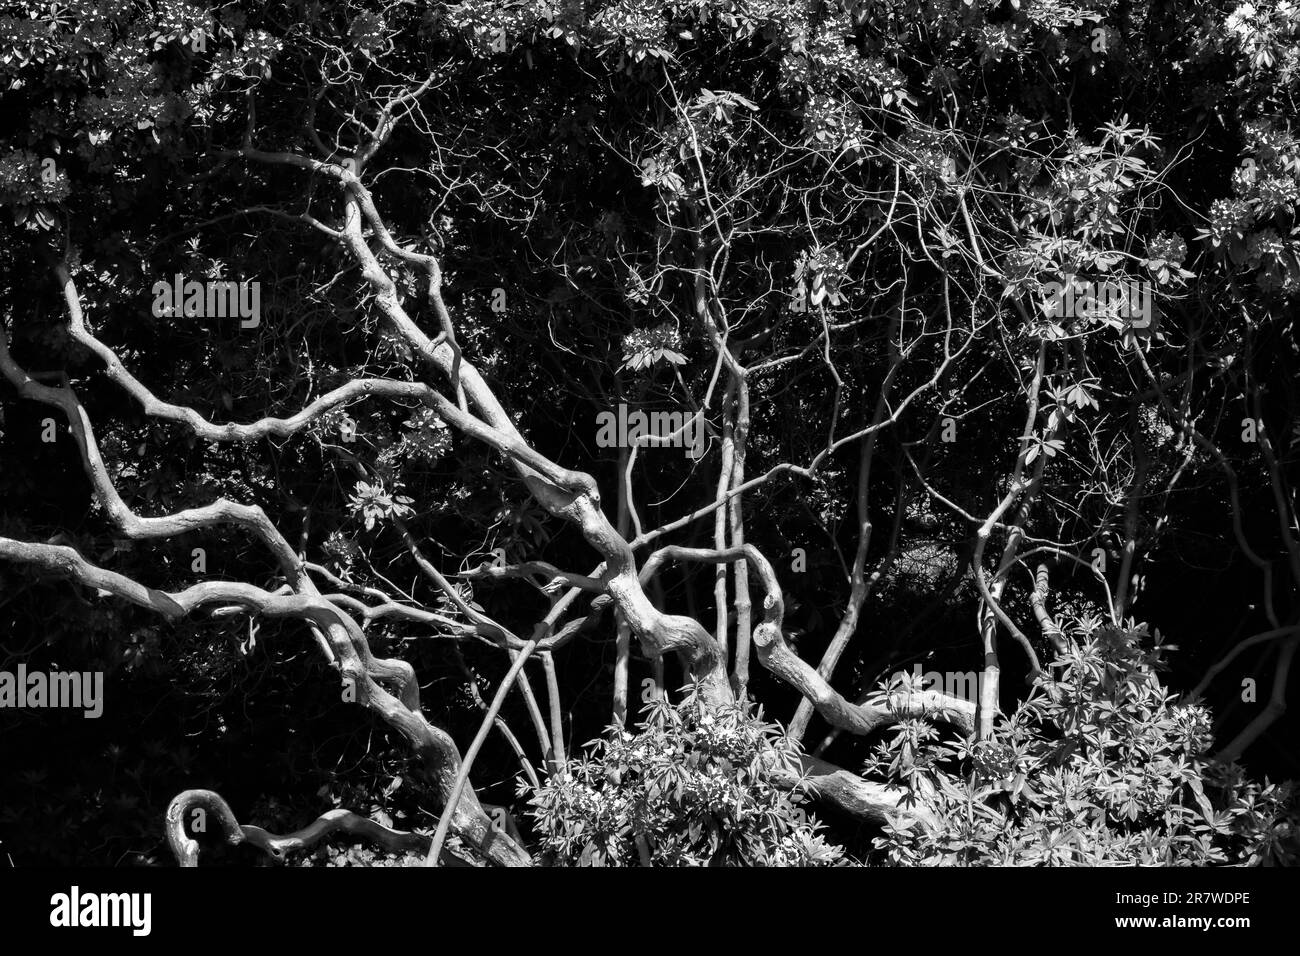 Rhododendron branches black & white Stock Photo